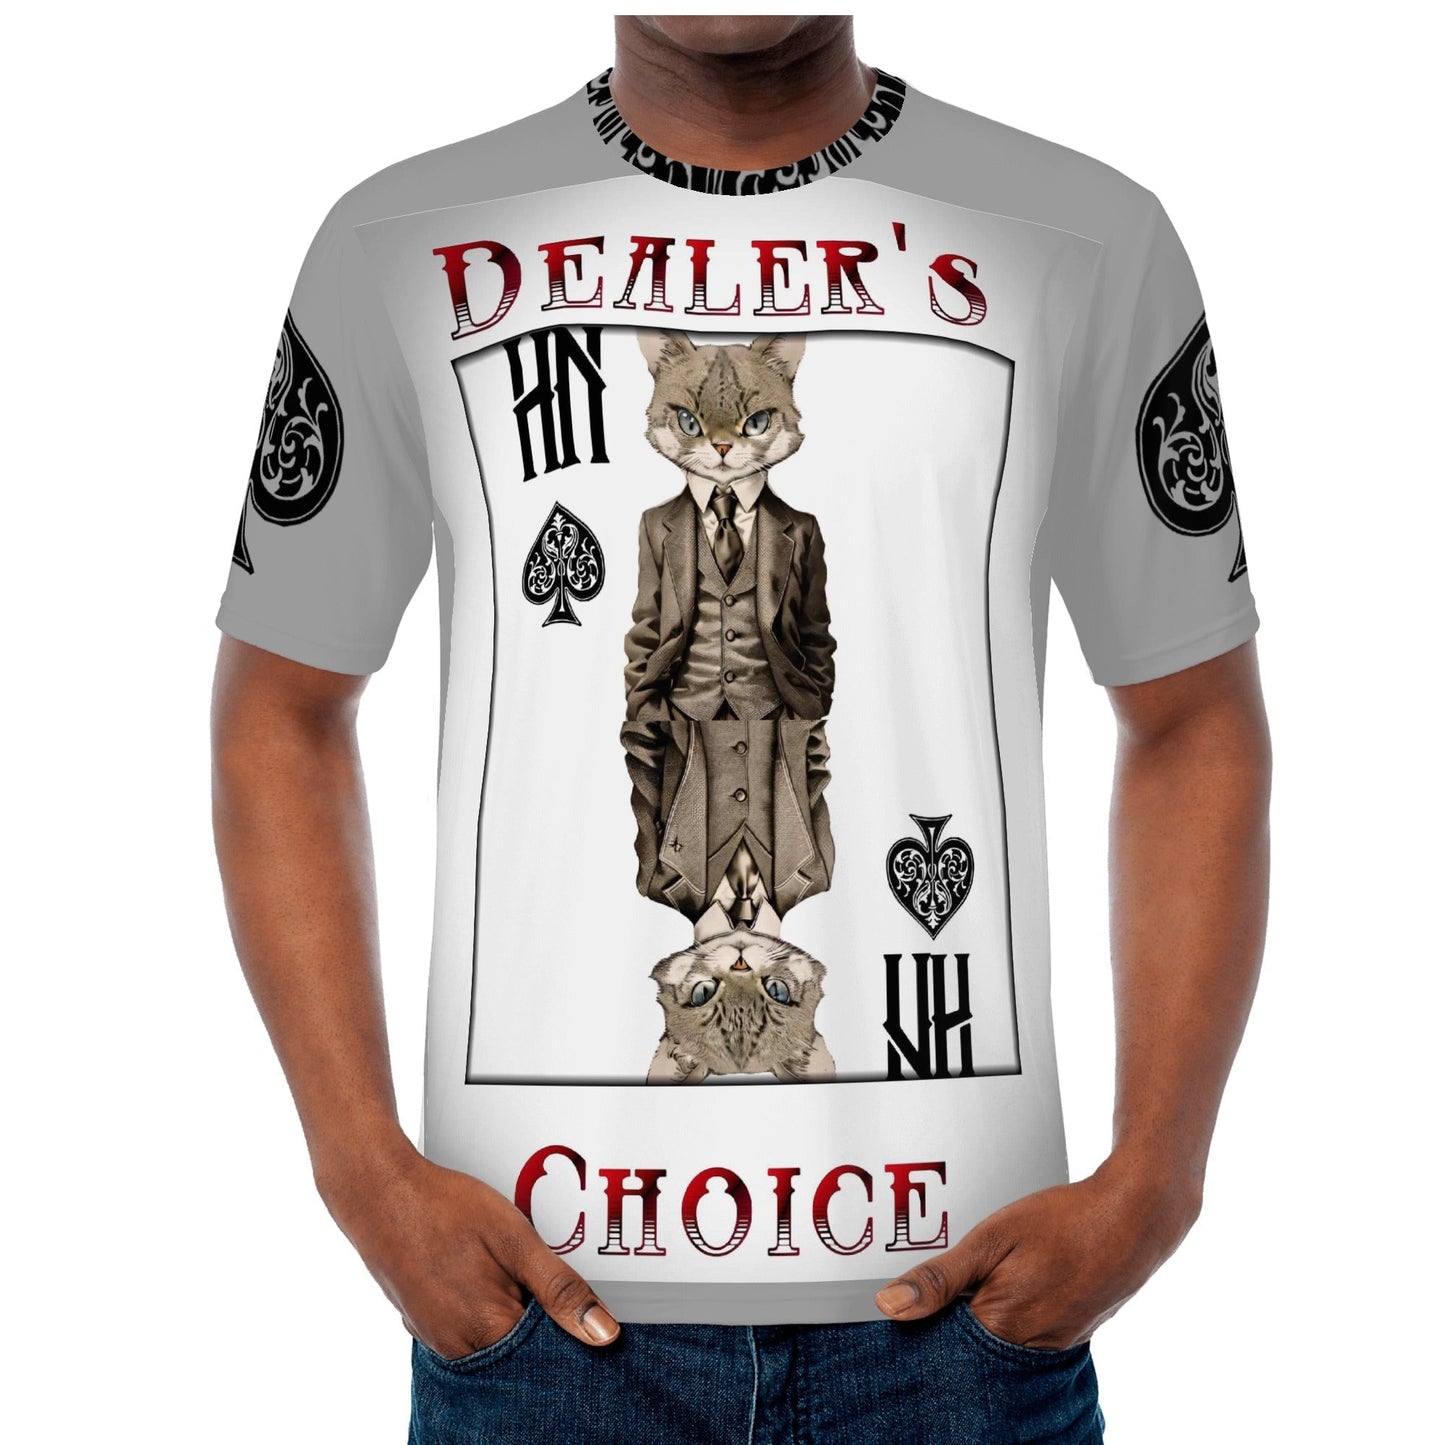 Stand out  with the  Dealers Choice Mens T-shirts  available at Hey Nugget. Grab yours today!